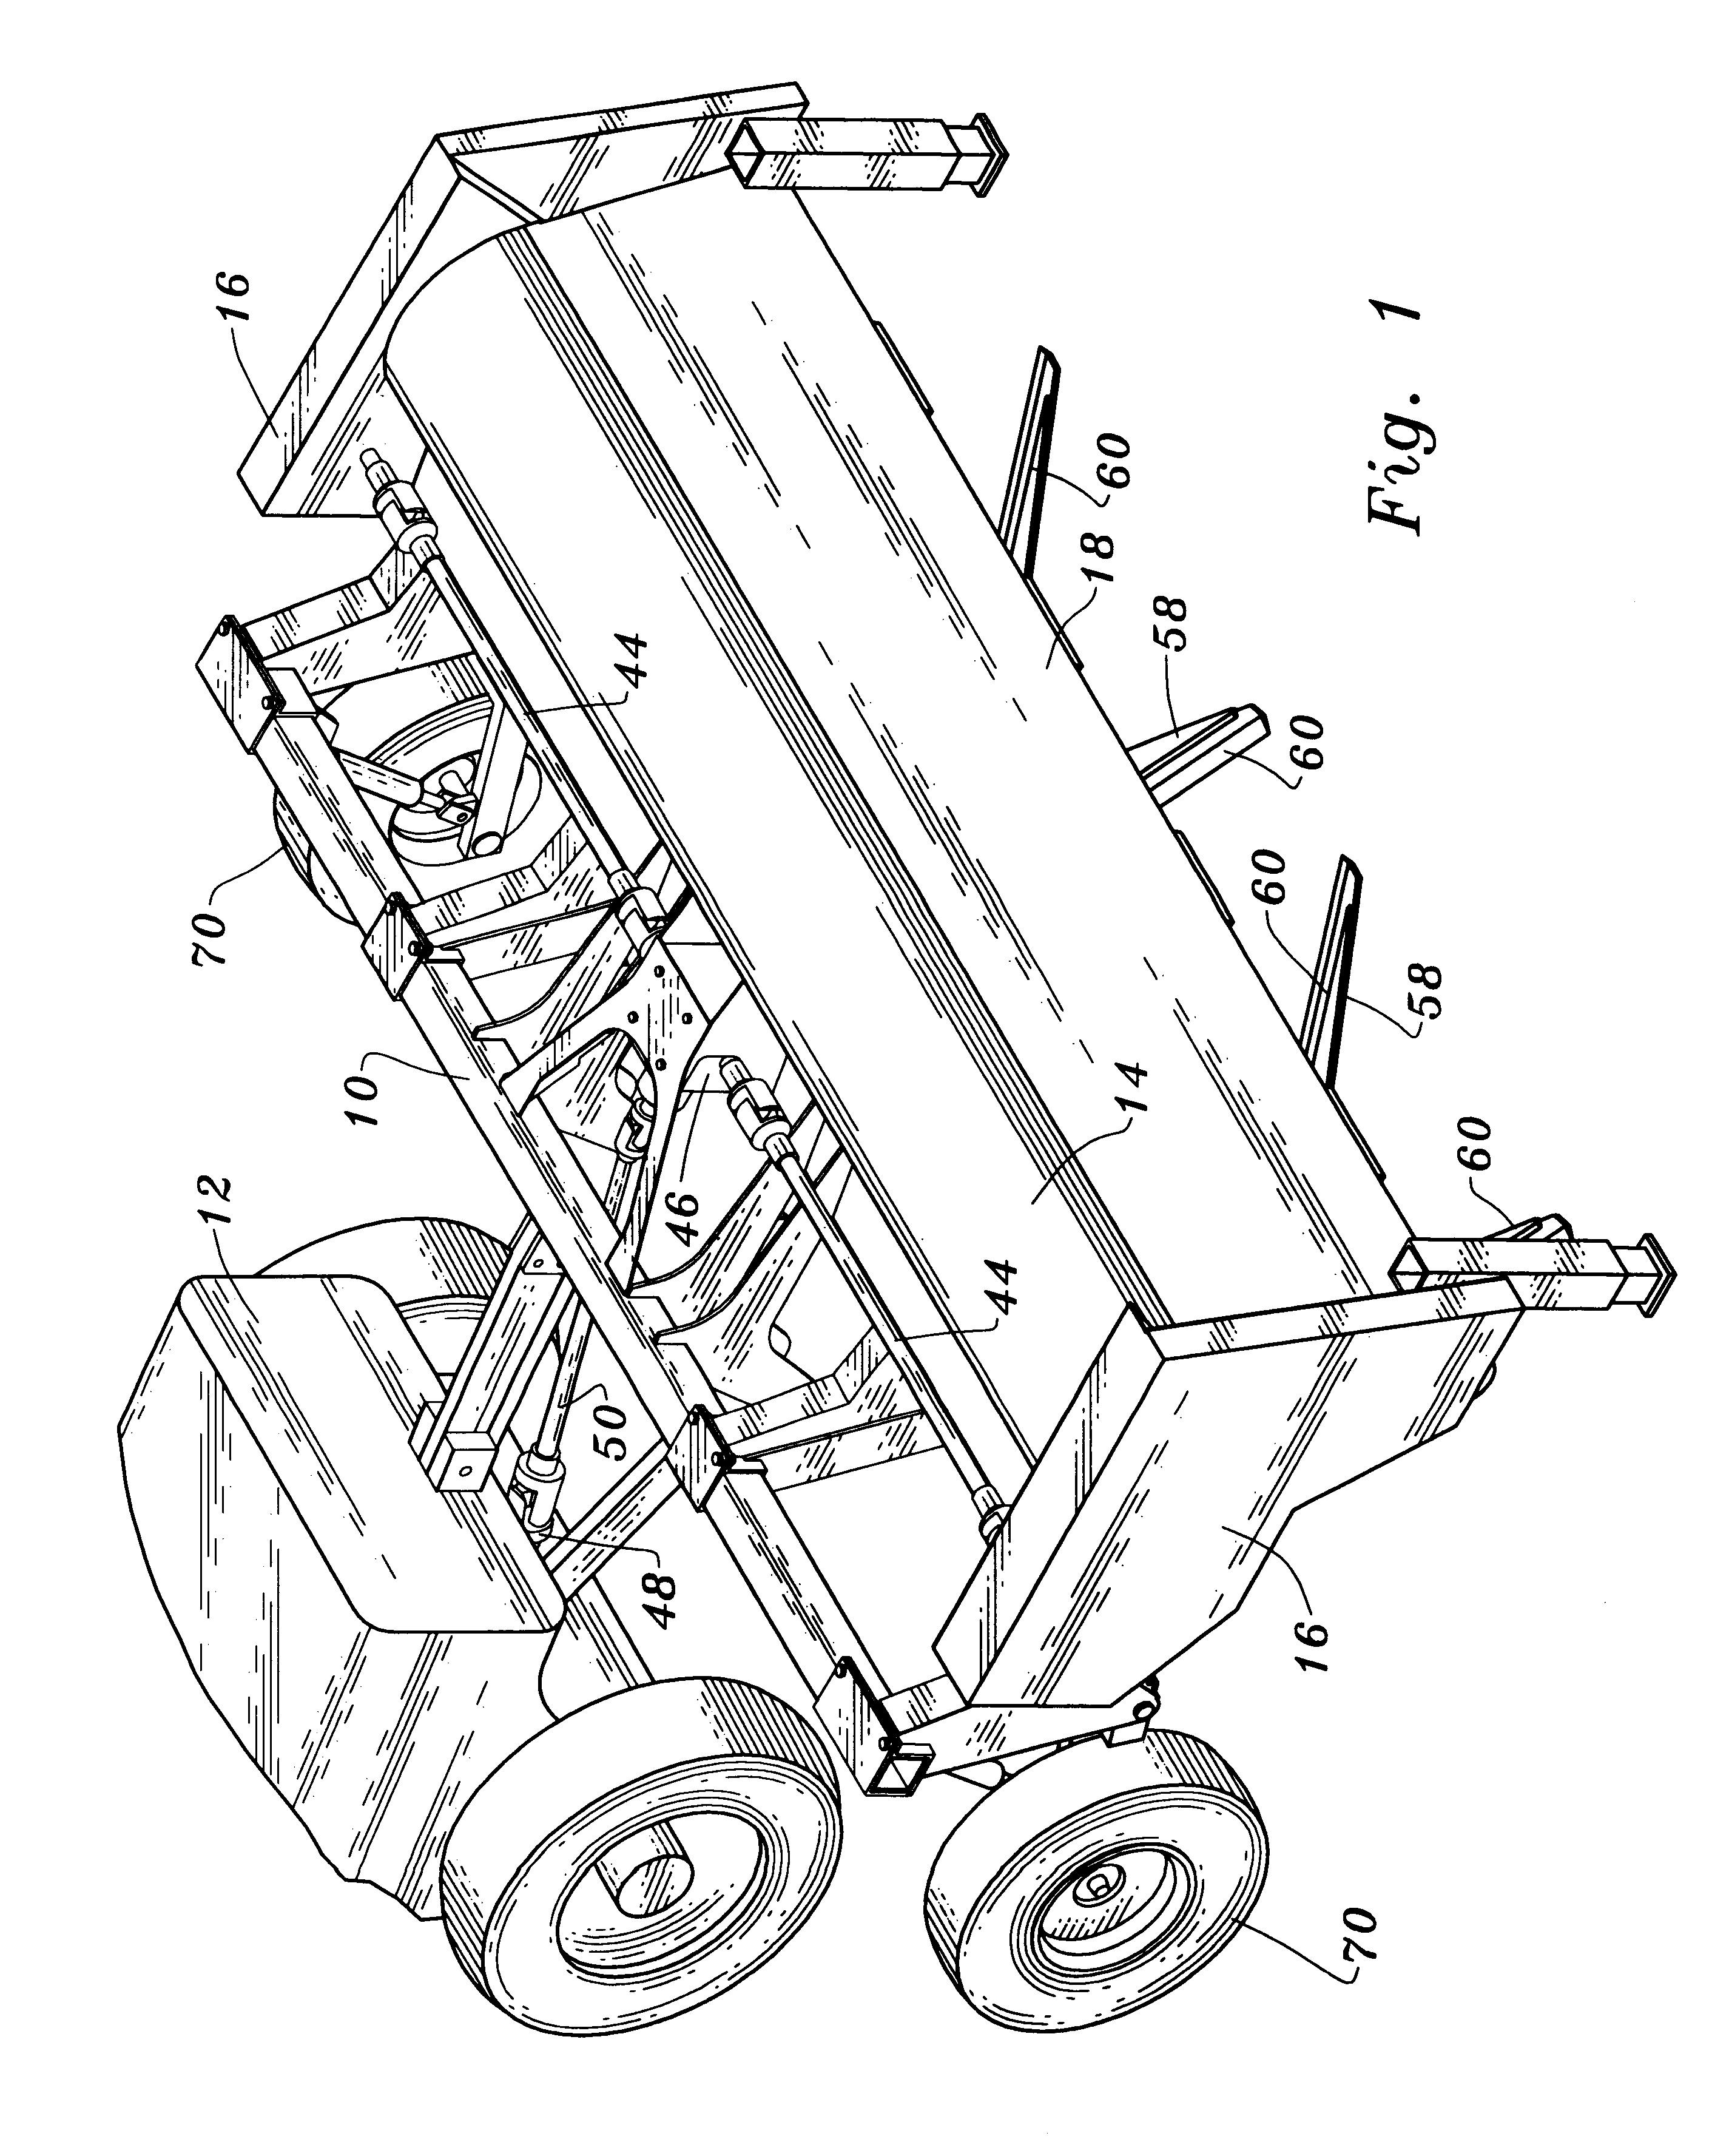 Apparatus and method for removing plant stalks from a field and shredding the plant stalks